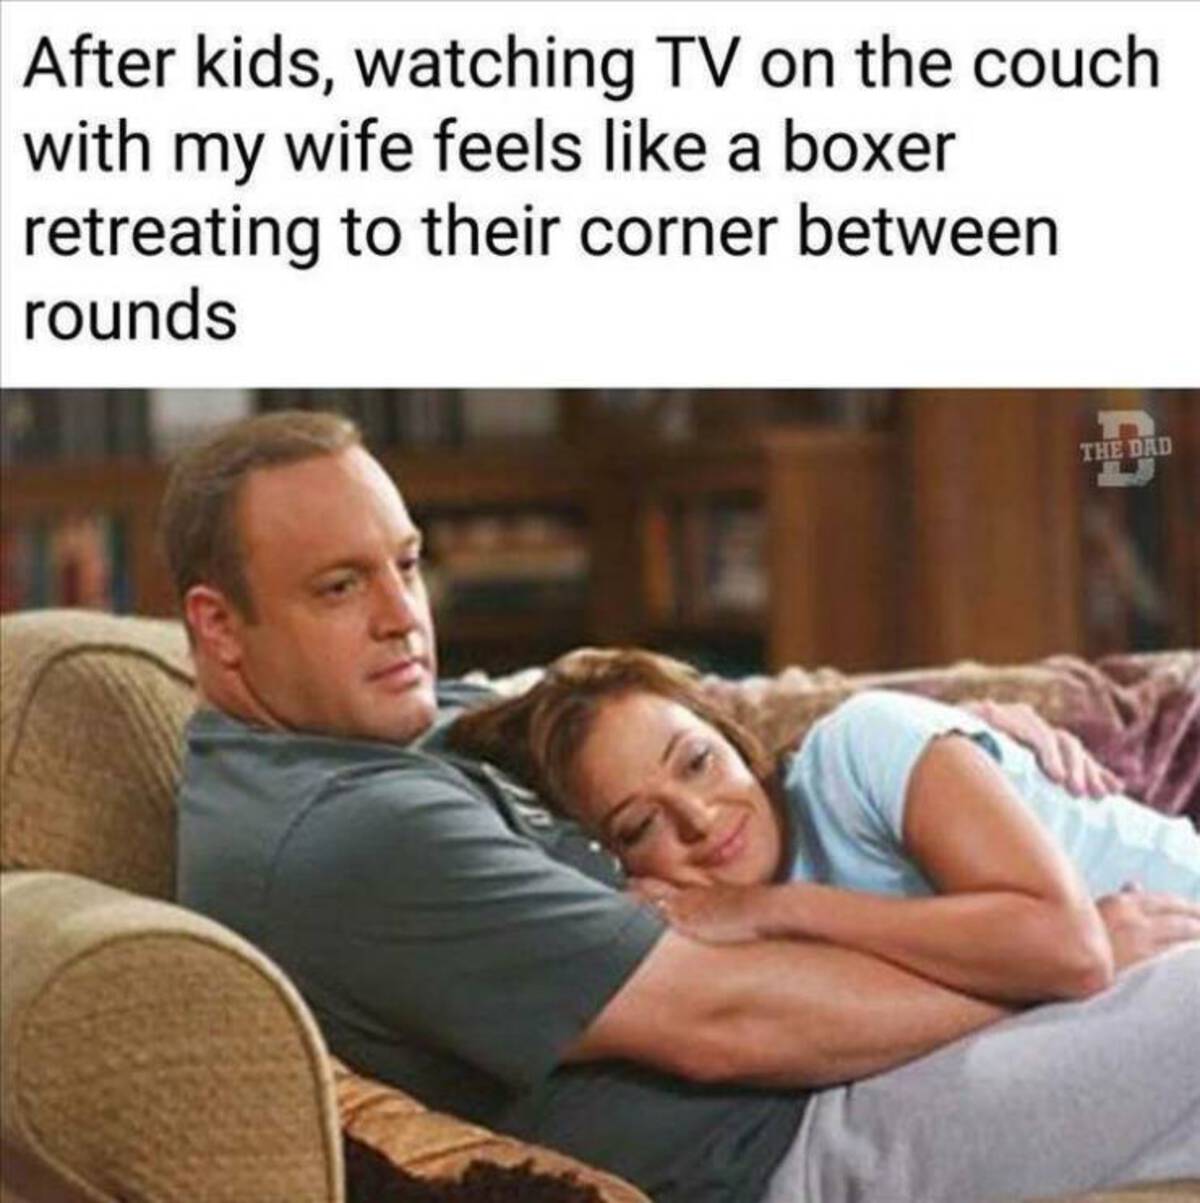 kevin james leah remini king of queens - After kids, watching Tv on the couch with my wife feels a boxer retreating to their corner between rounds The Dad